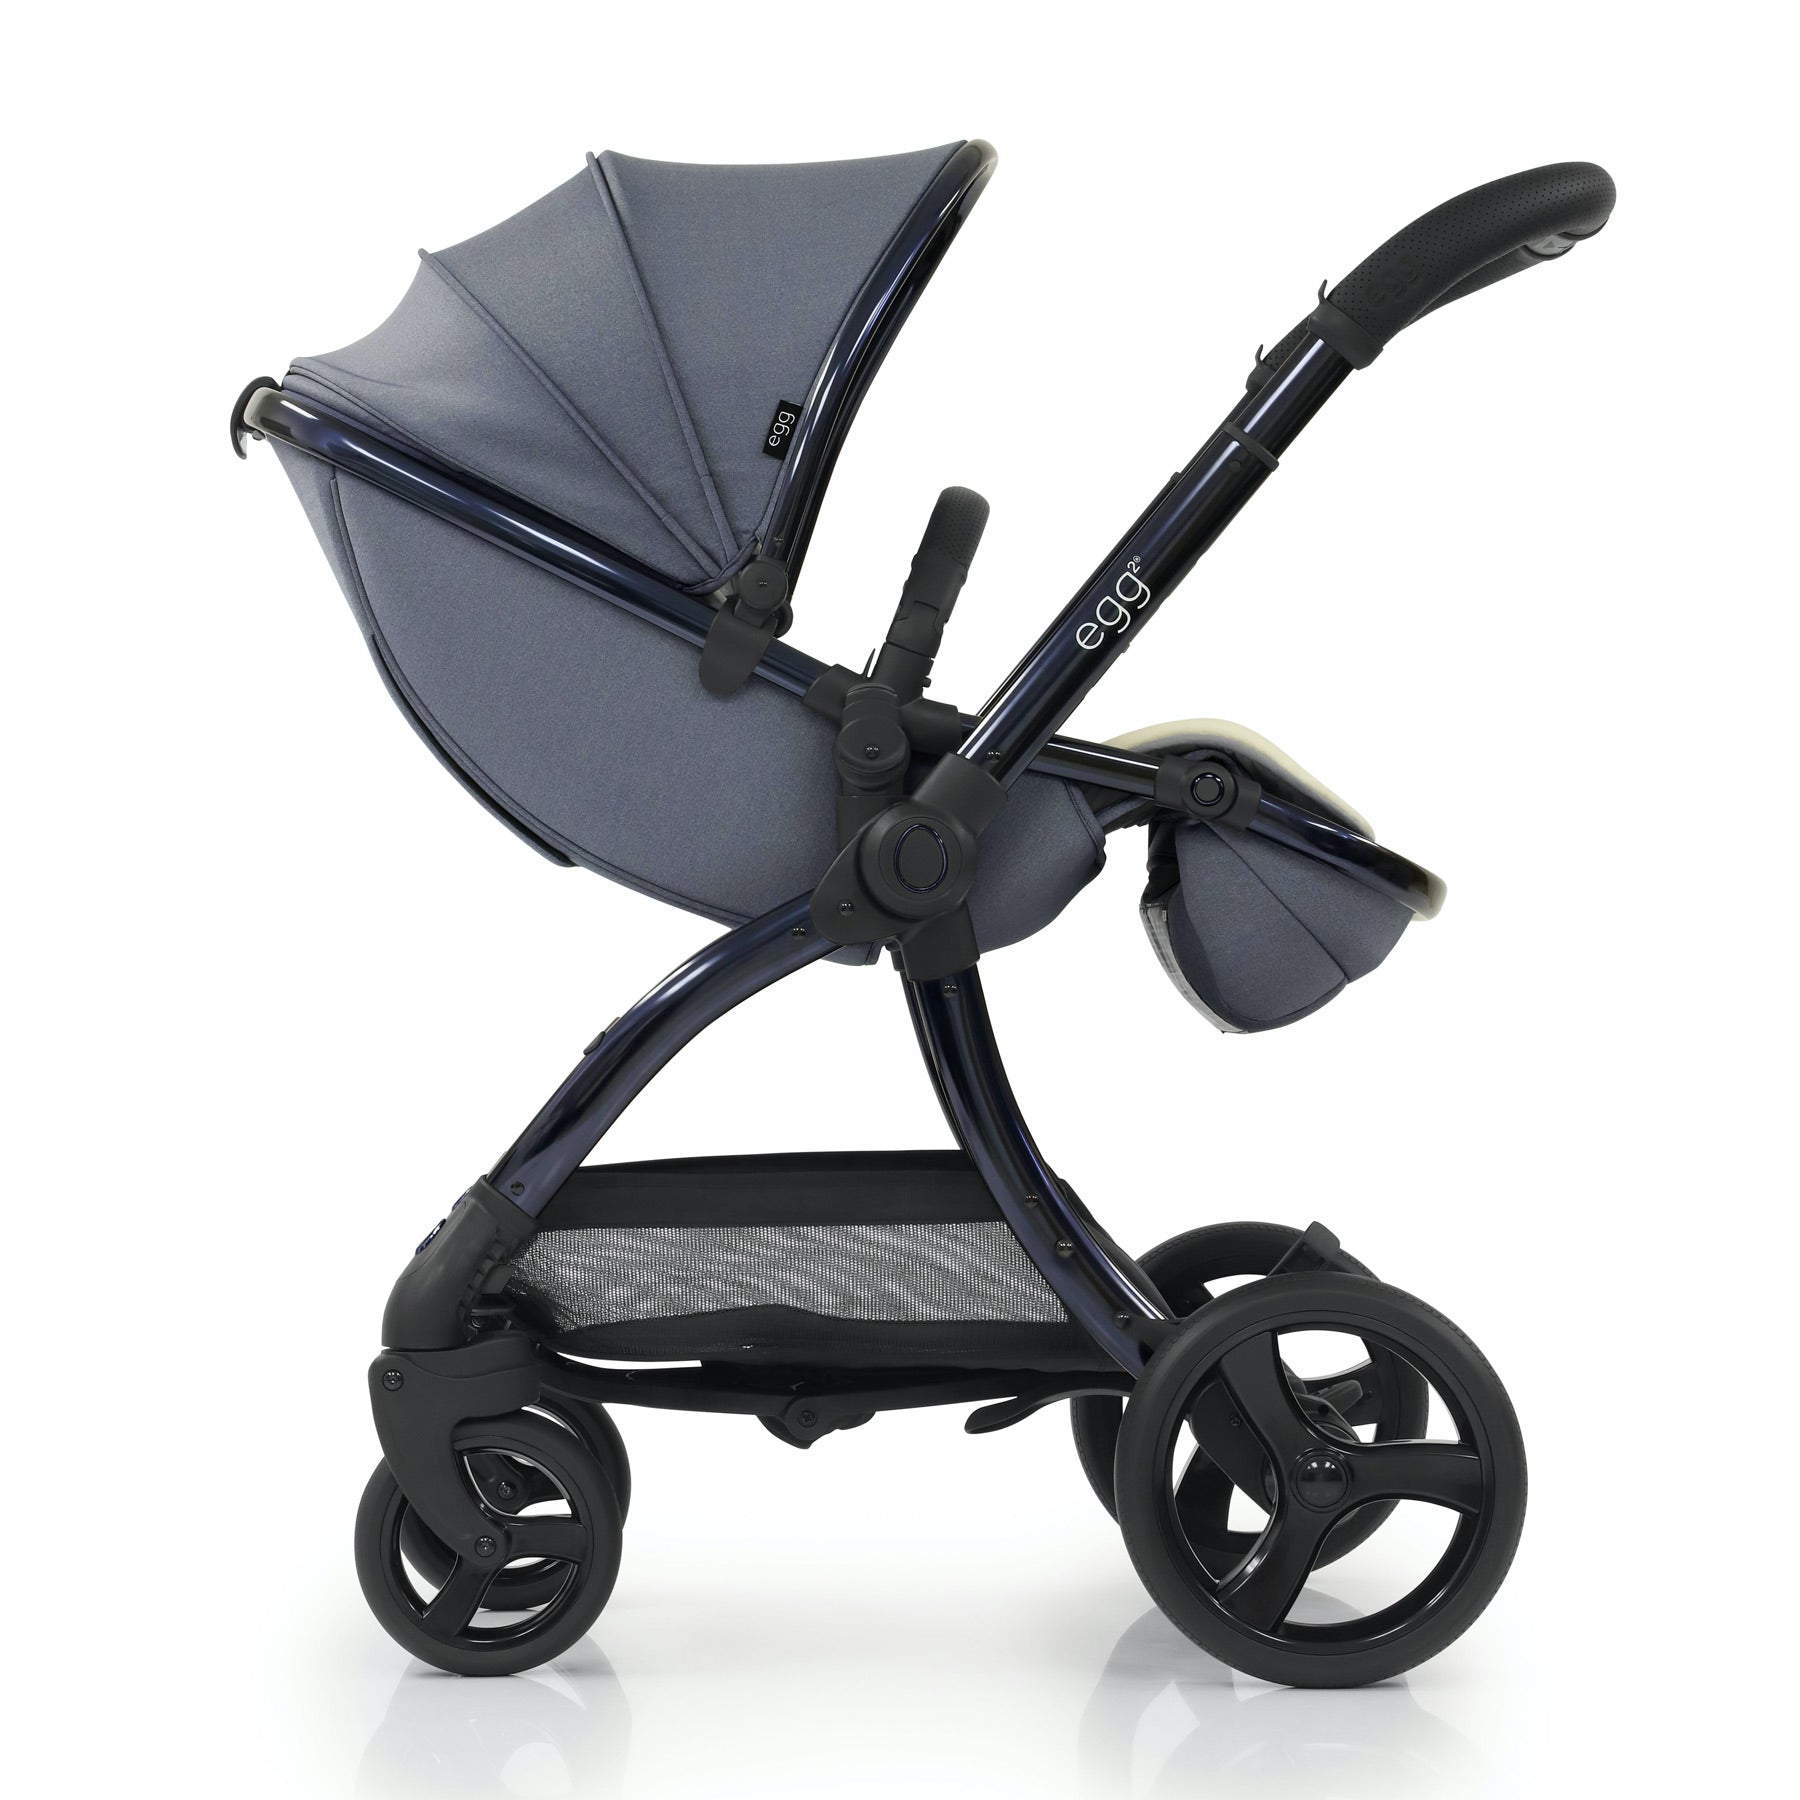 egg2® Stroller & Carry Cot in Chambray Bundle